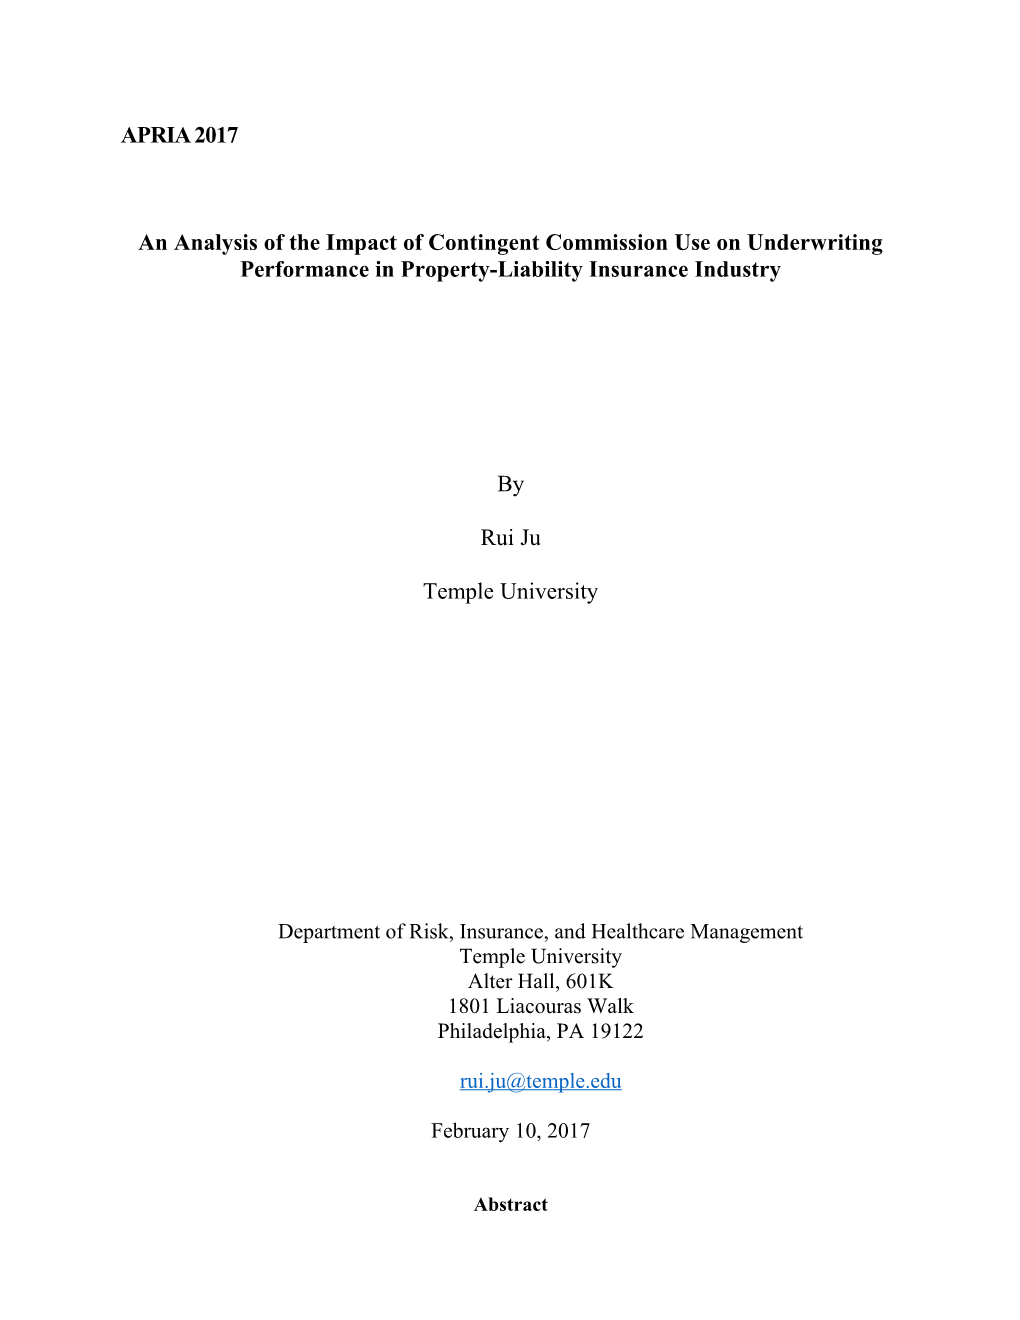 An Analysis of the Impact of Contingent Commission Use on Underwriting Performance In